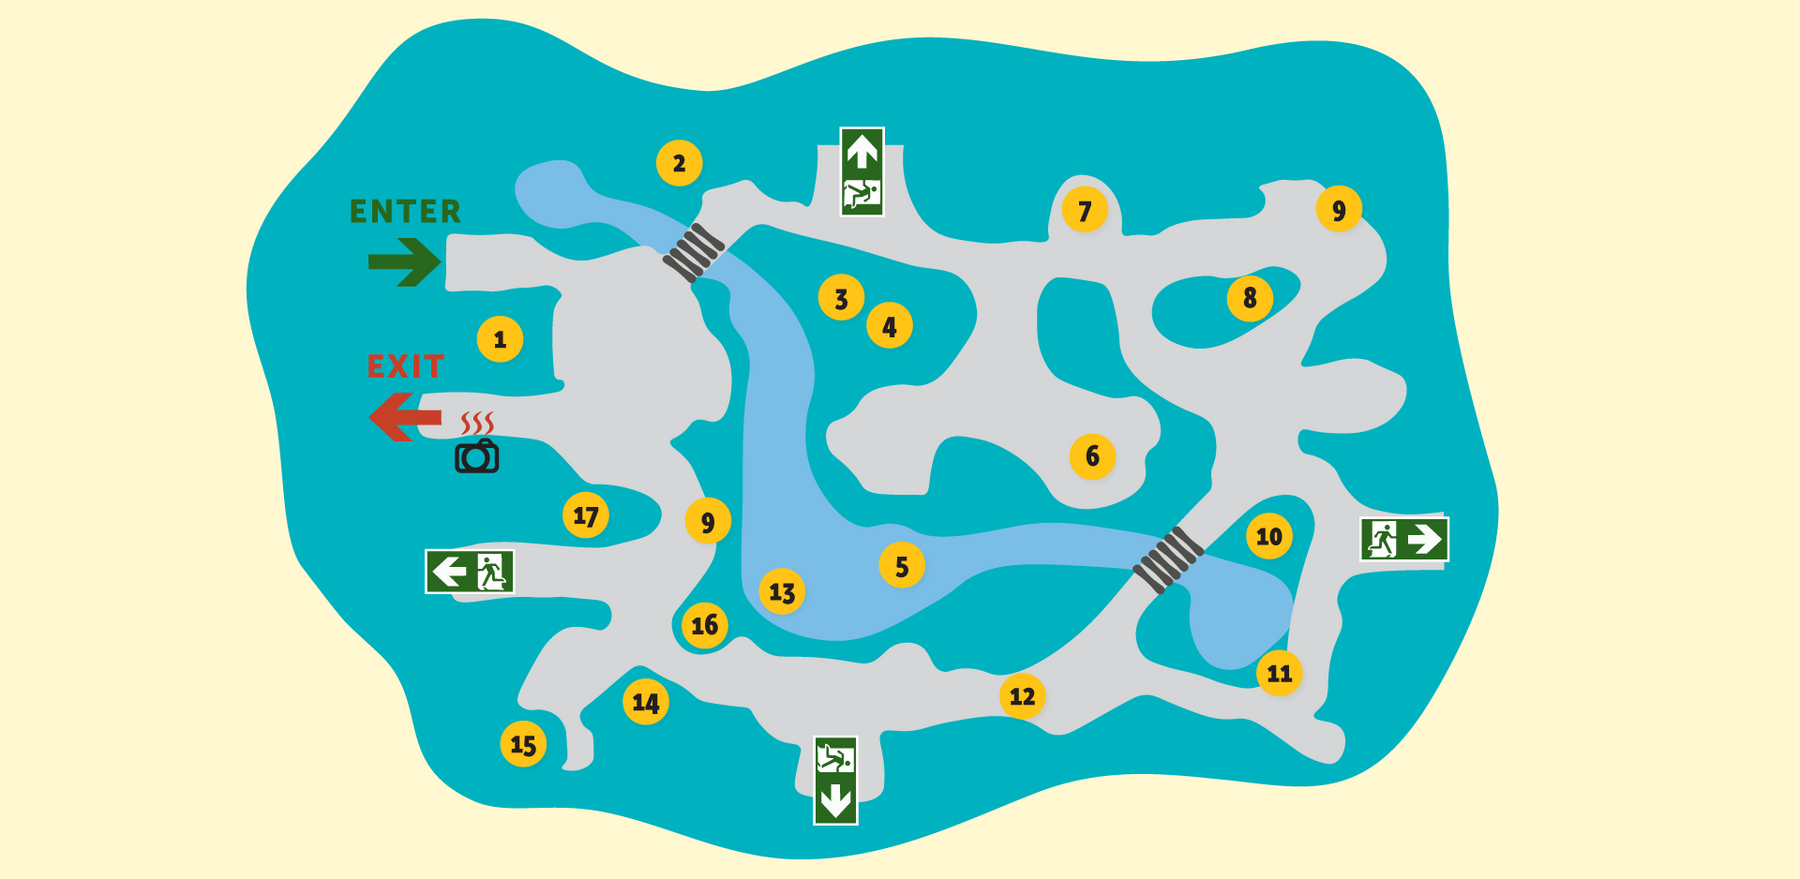 Map of the Victoria Butterfly Gardens with numbers highlighting points of interest